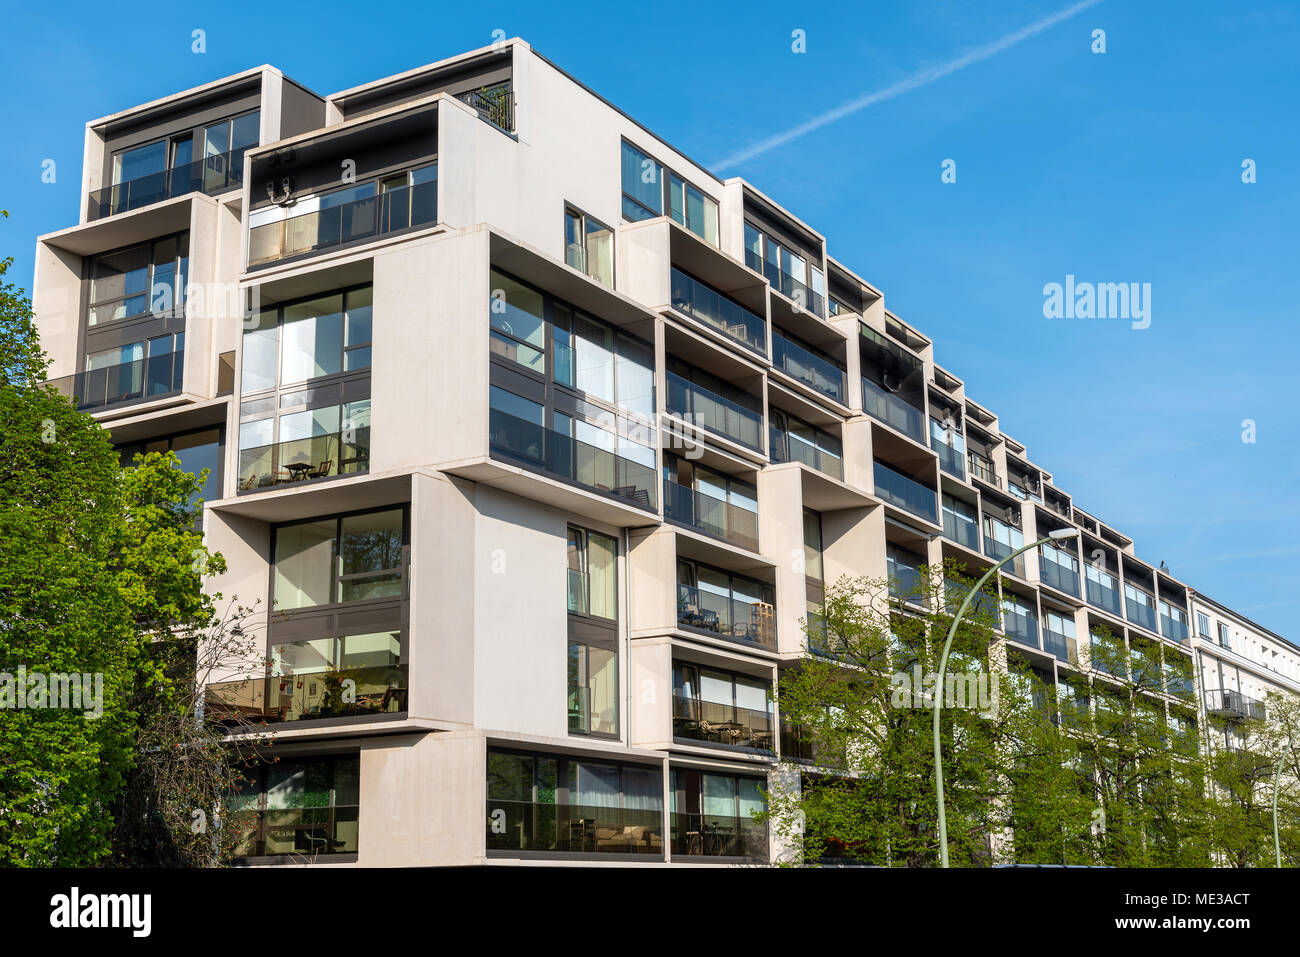 Modern luxury residential construction seen at the Prenzlauer Berg district in Berlin, Germany Stock Photo